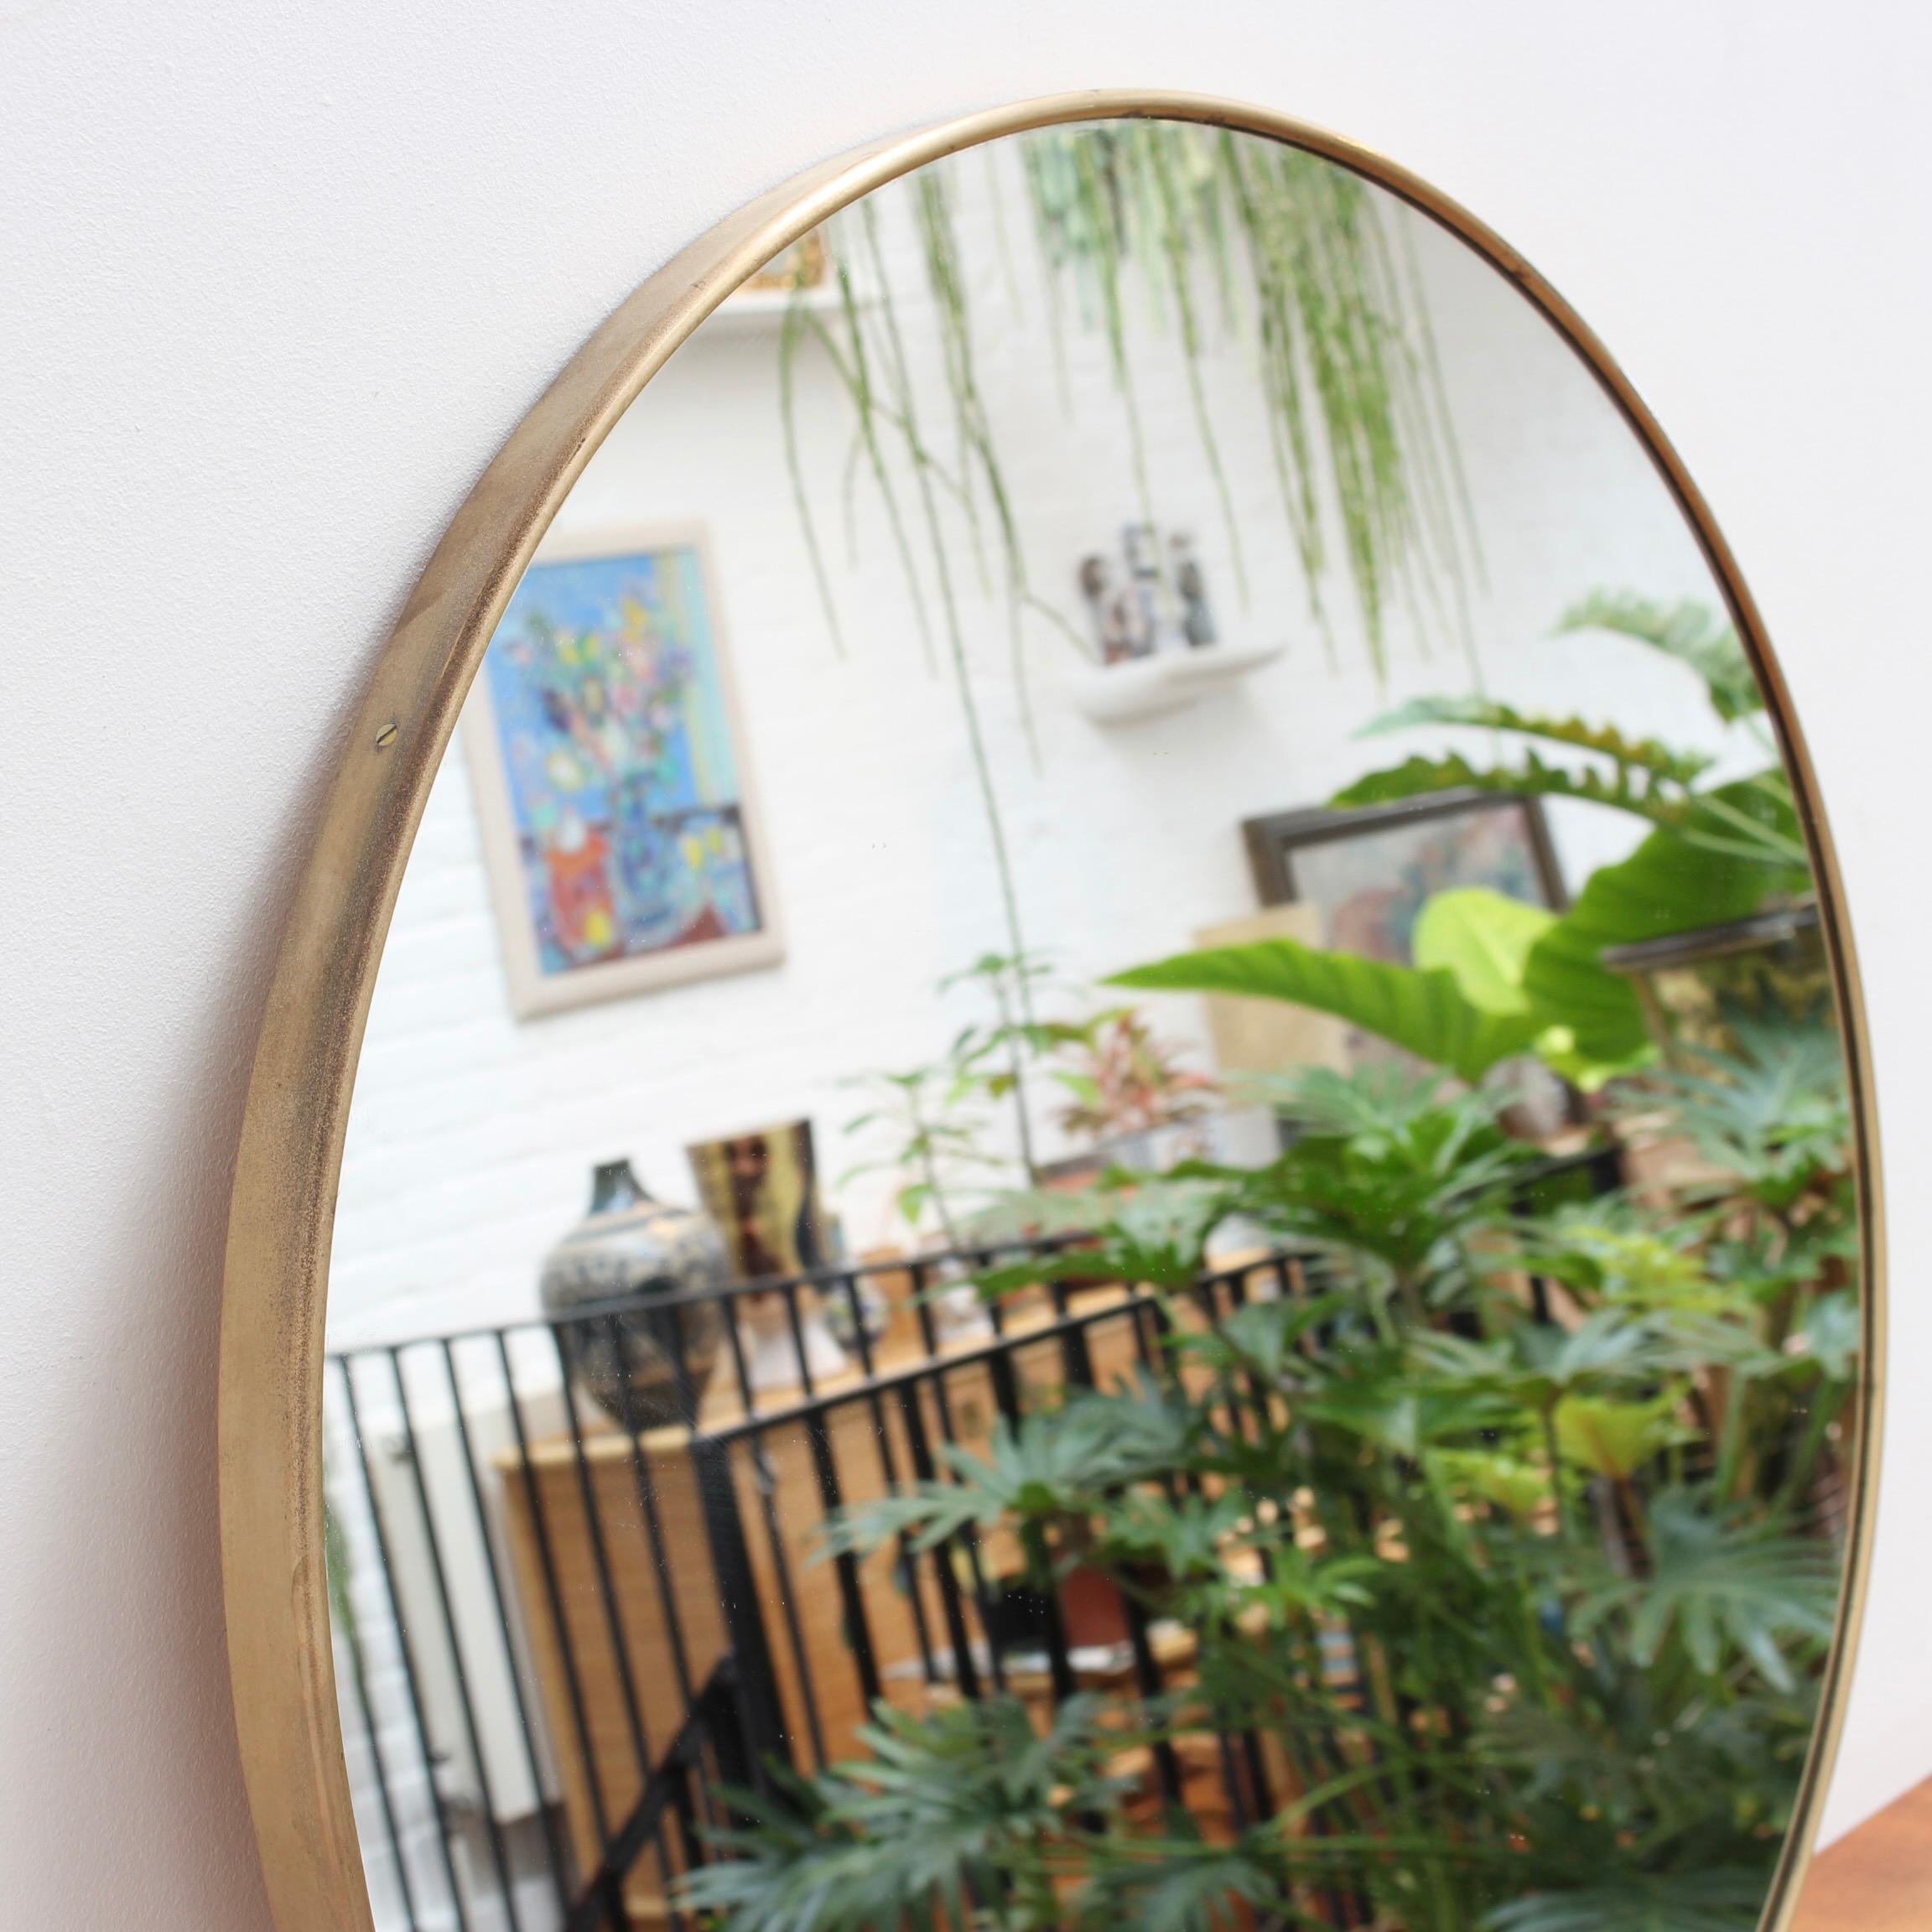 Mid-20th Century Vintage Italian Wall Mirror with Brass Frame 'circa 1950s'